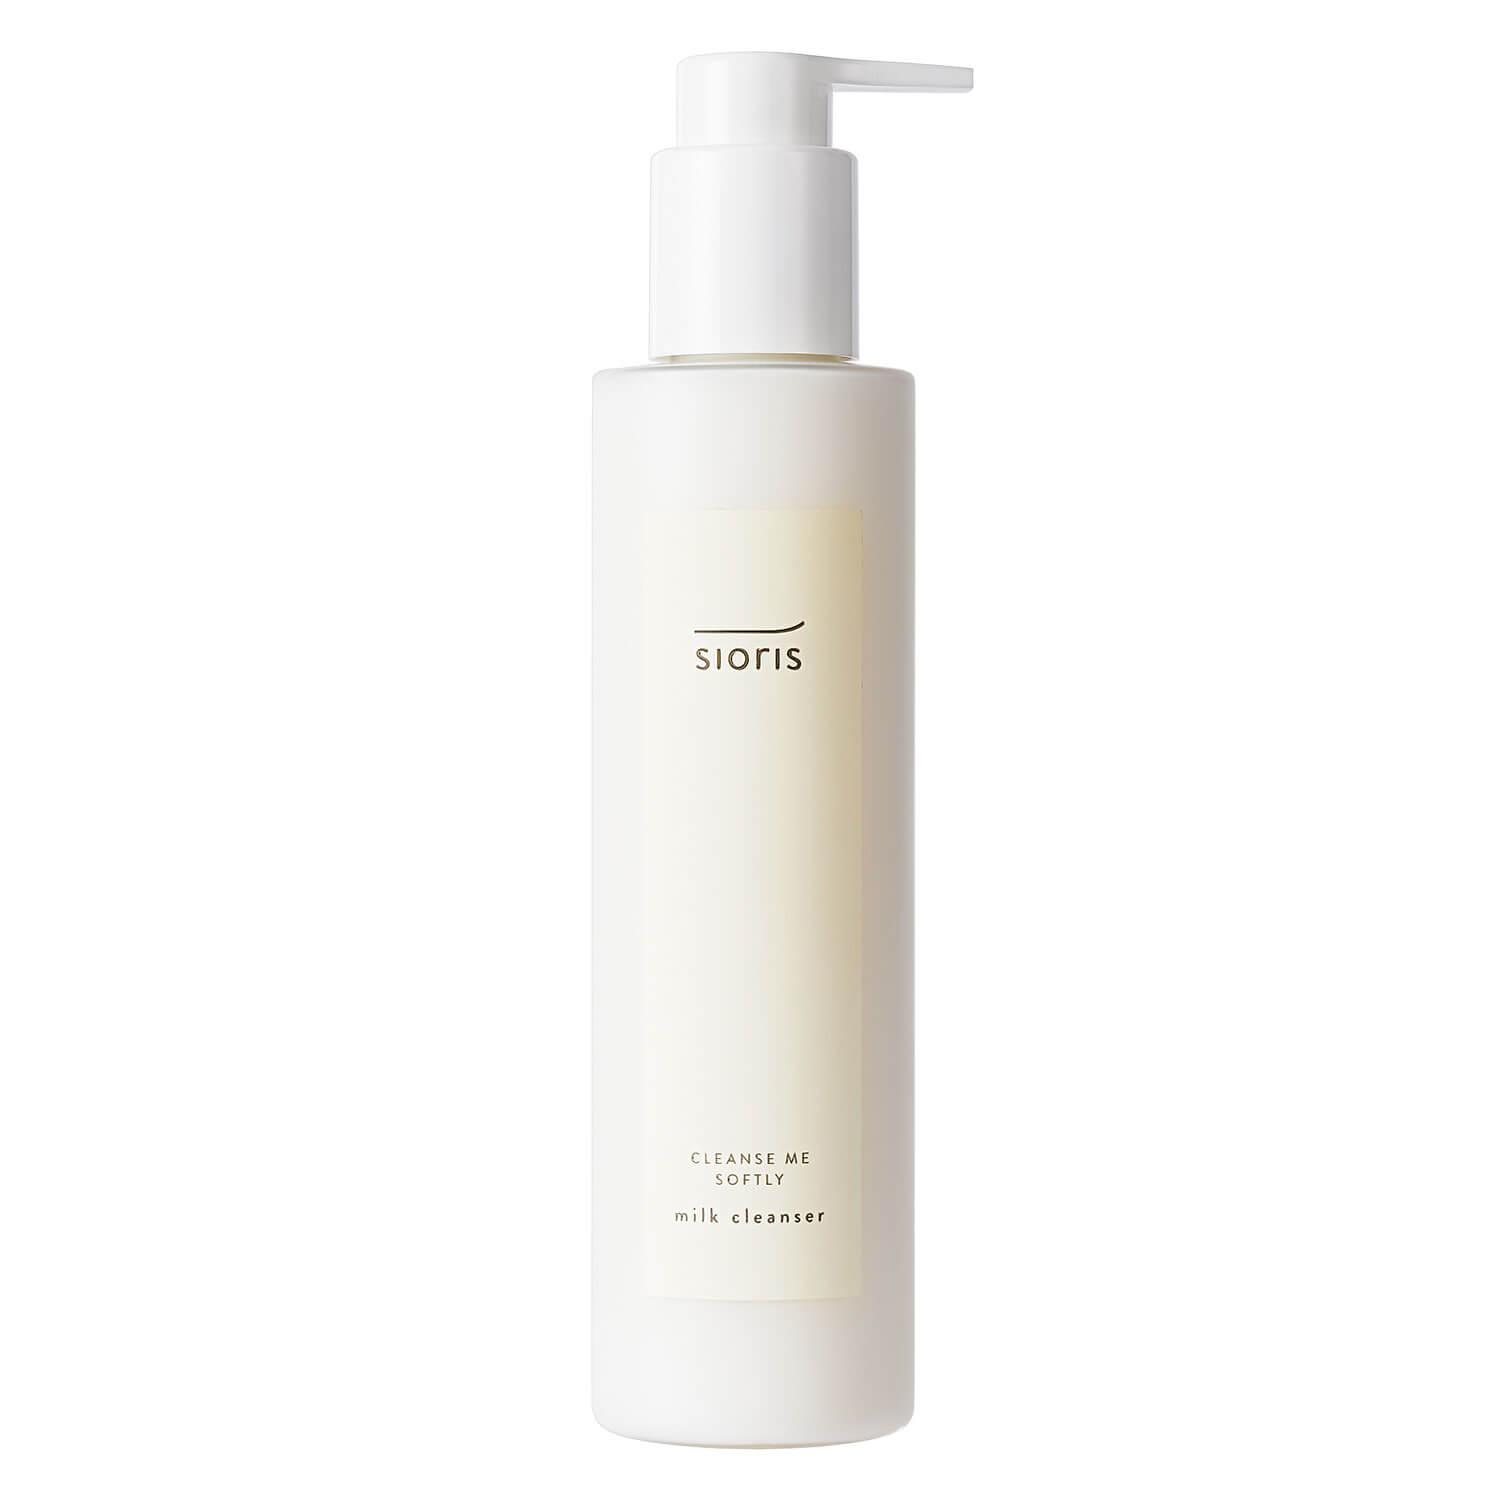 sioris - CLEANSE ME SOFTLY milk cleanser